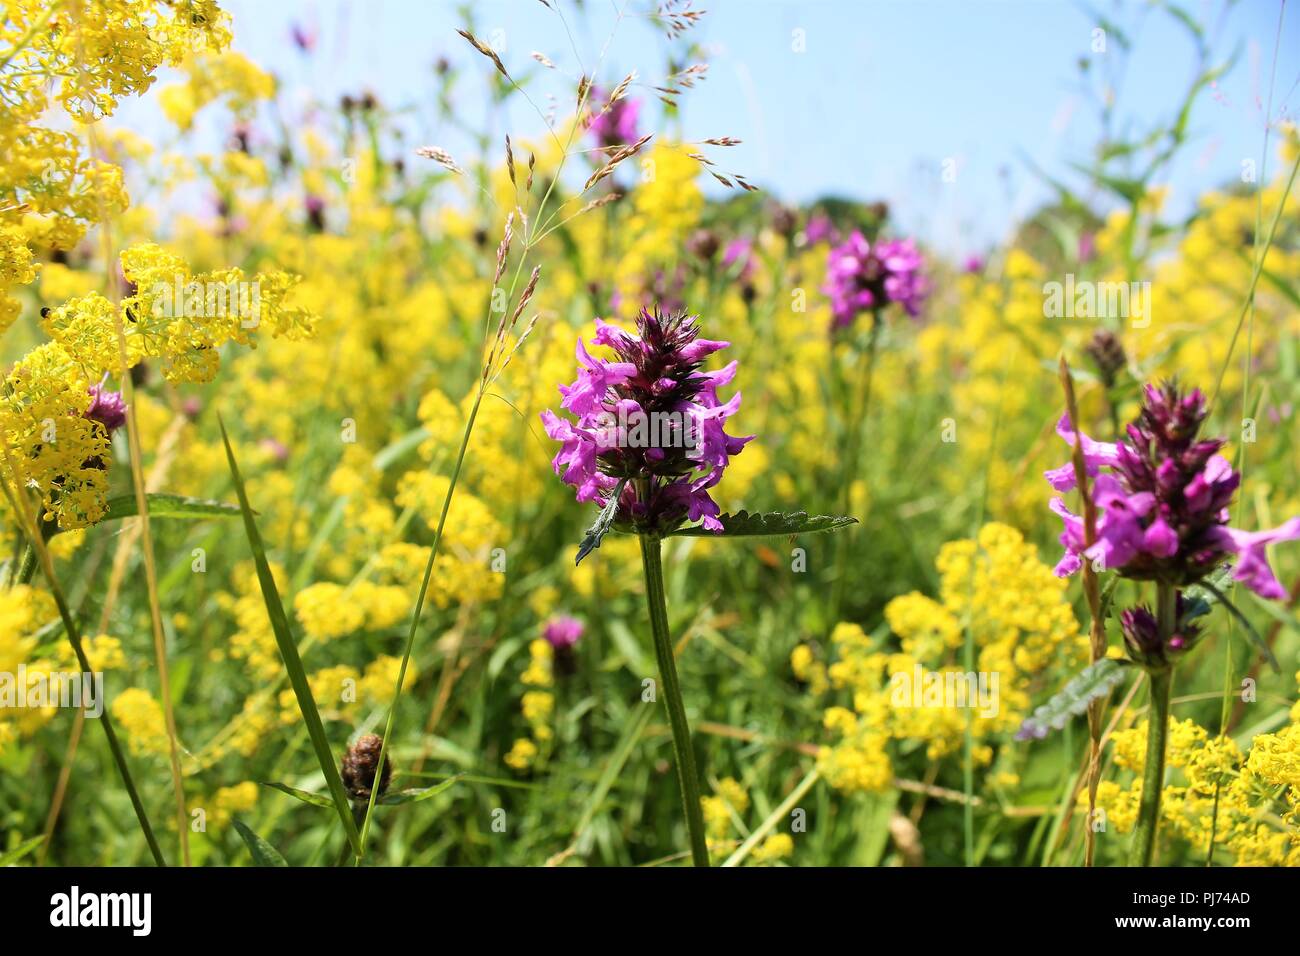 An english wildflower meadow with purple and yellow flowers Stock Photo